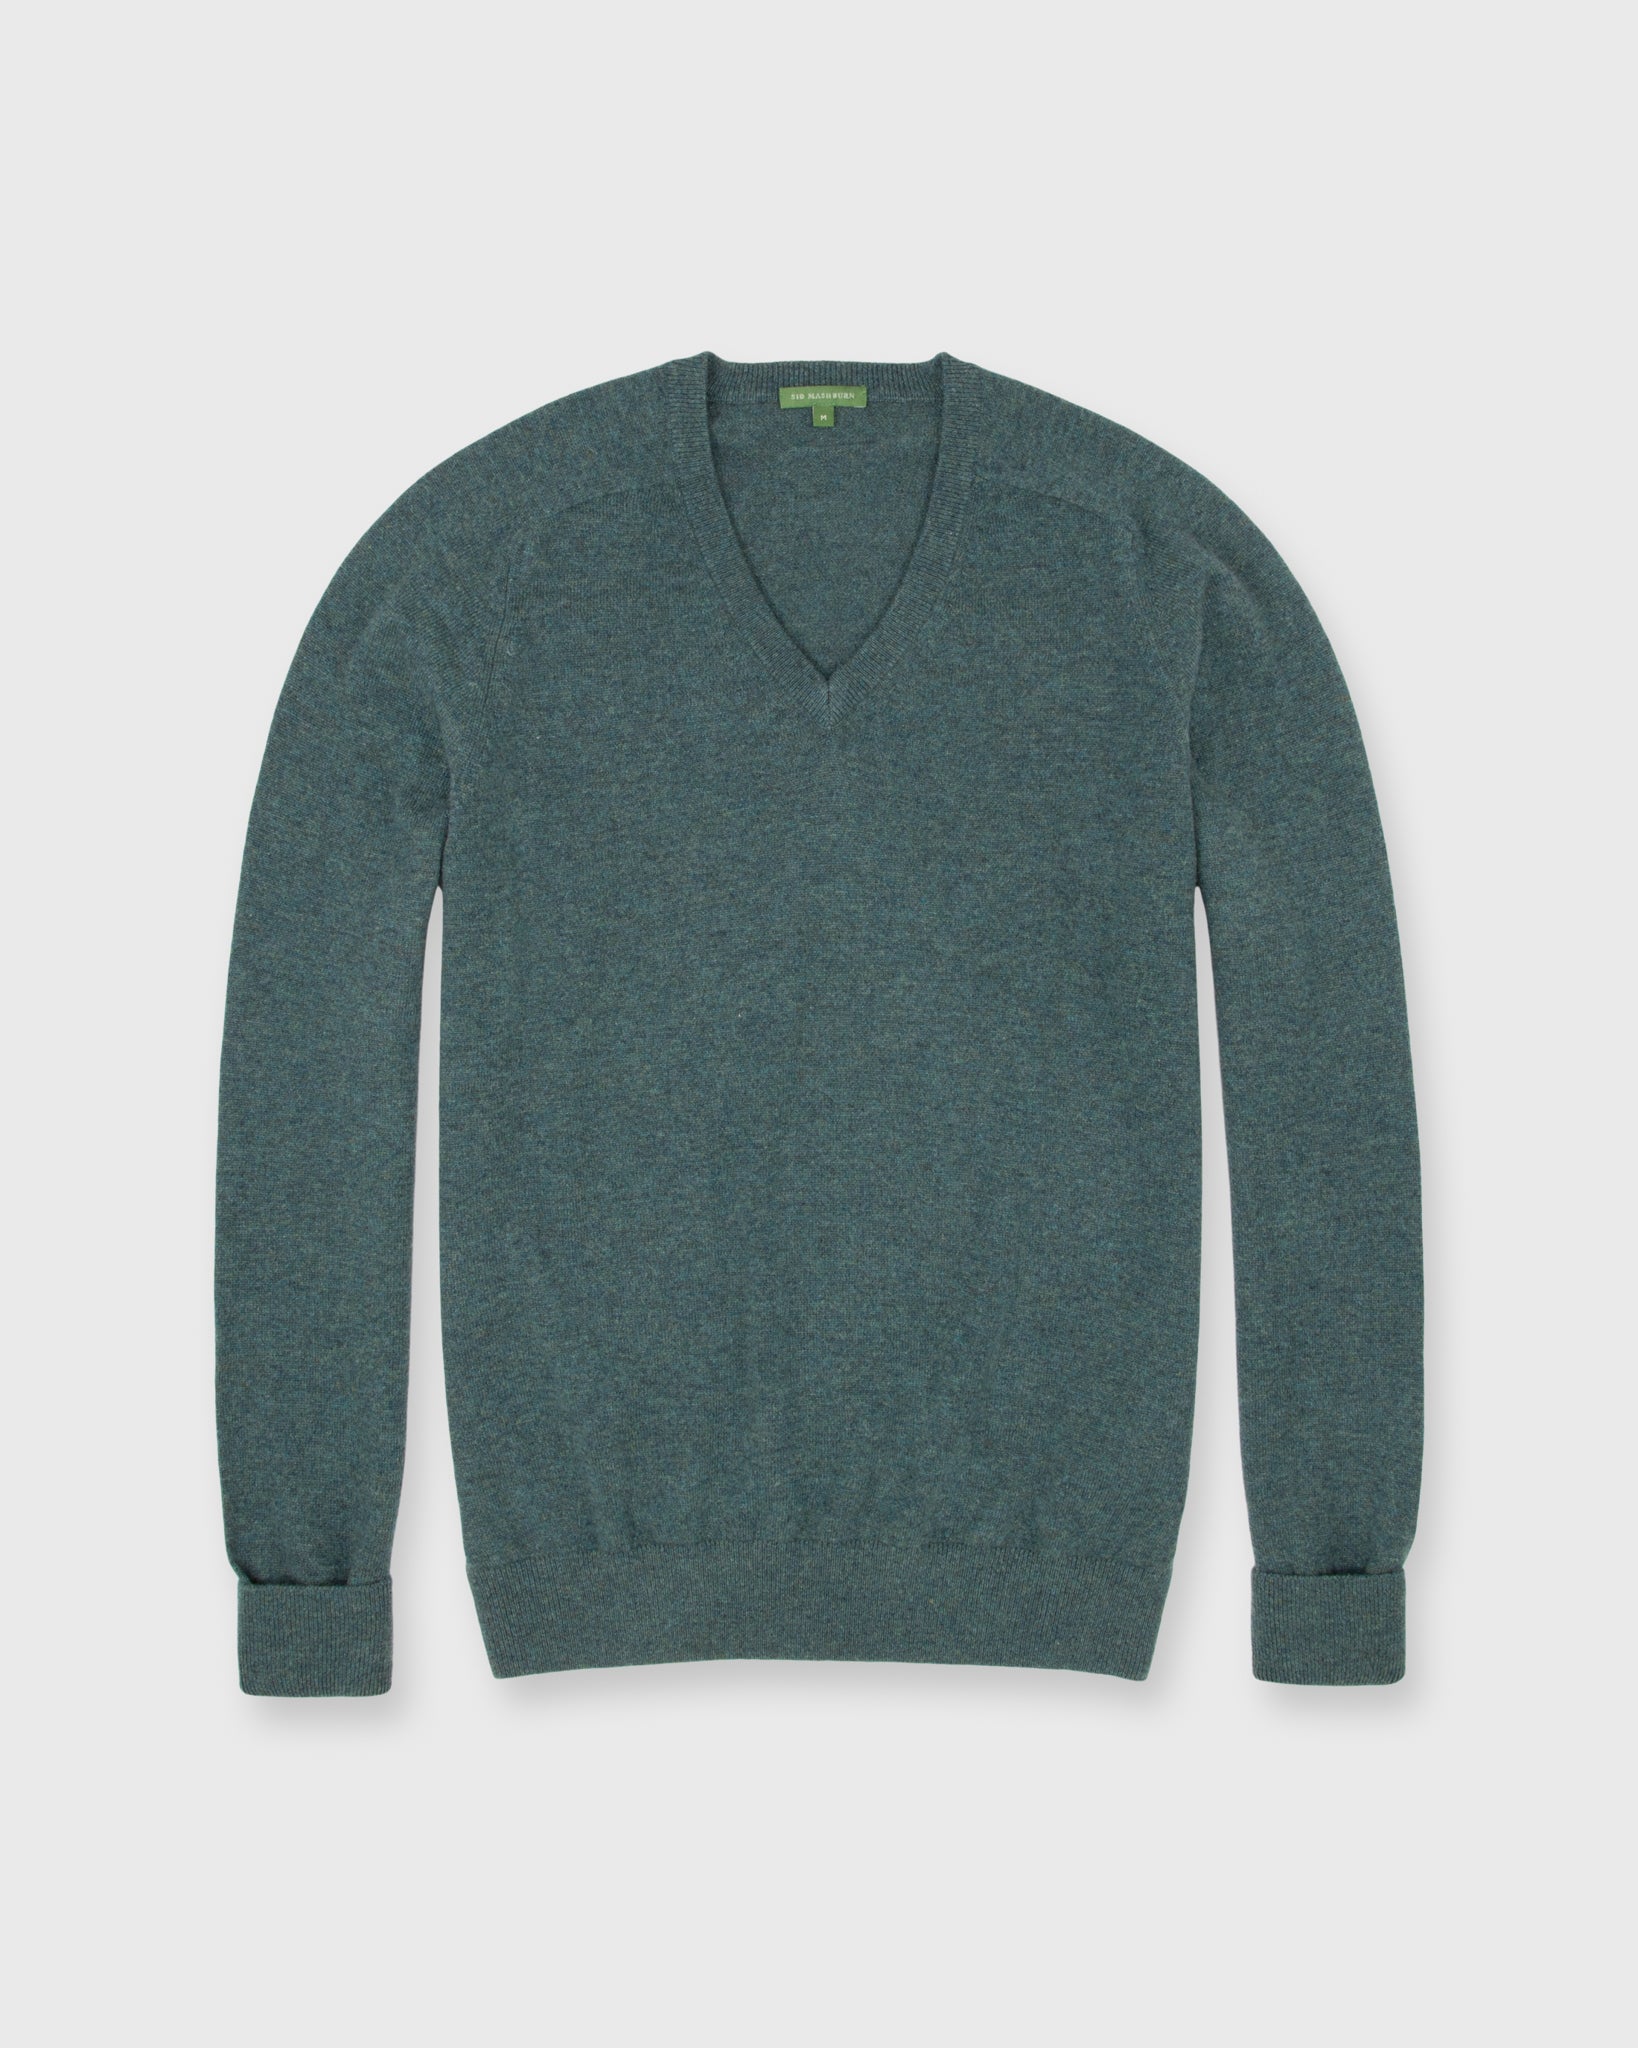 Classic V-Neck Sweater in Heather Pine Cashmere